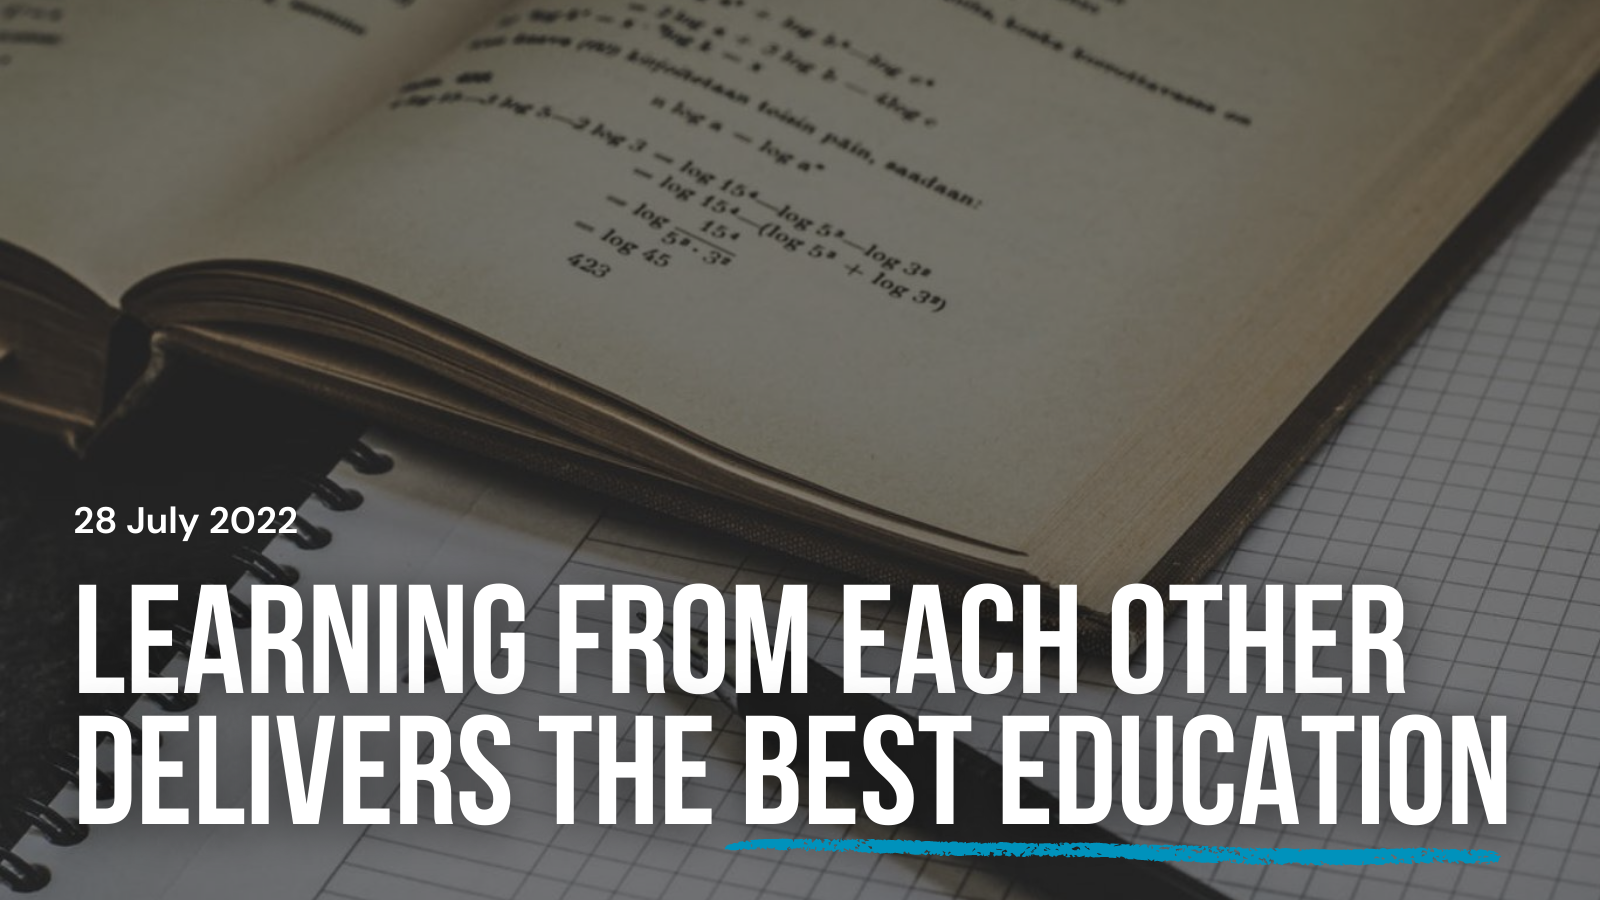 65. learning from each other delivers best education